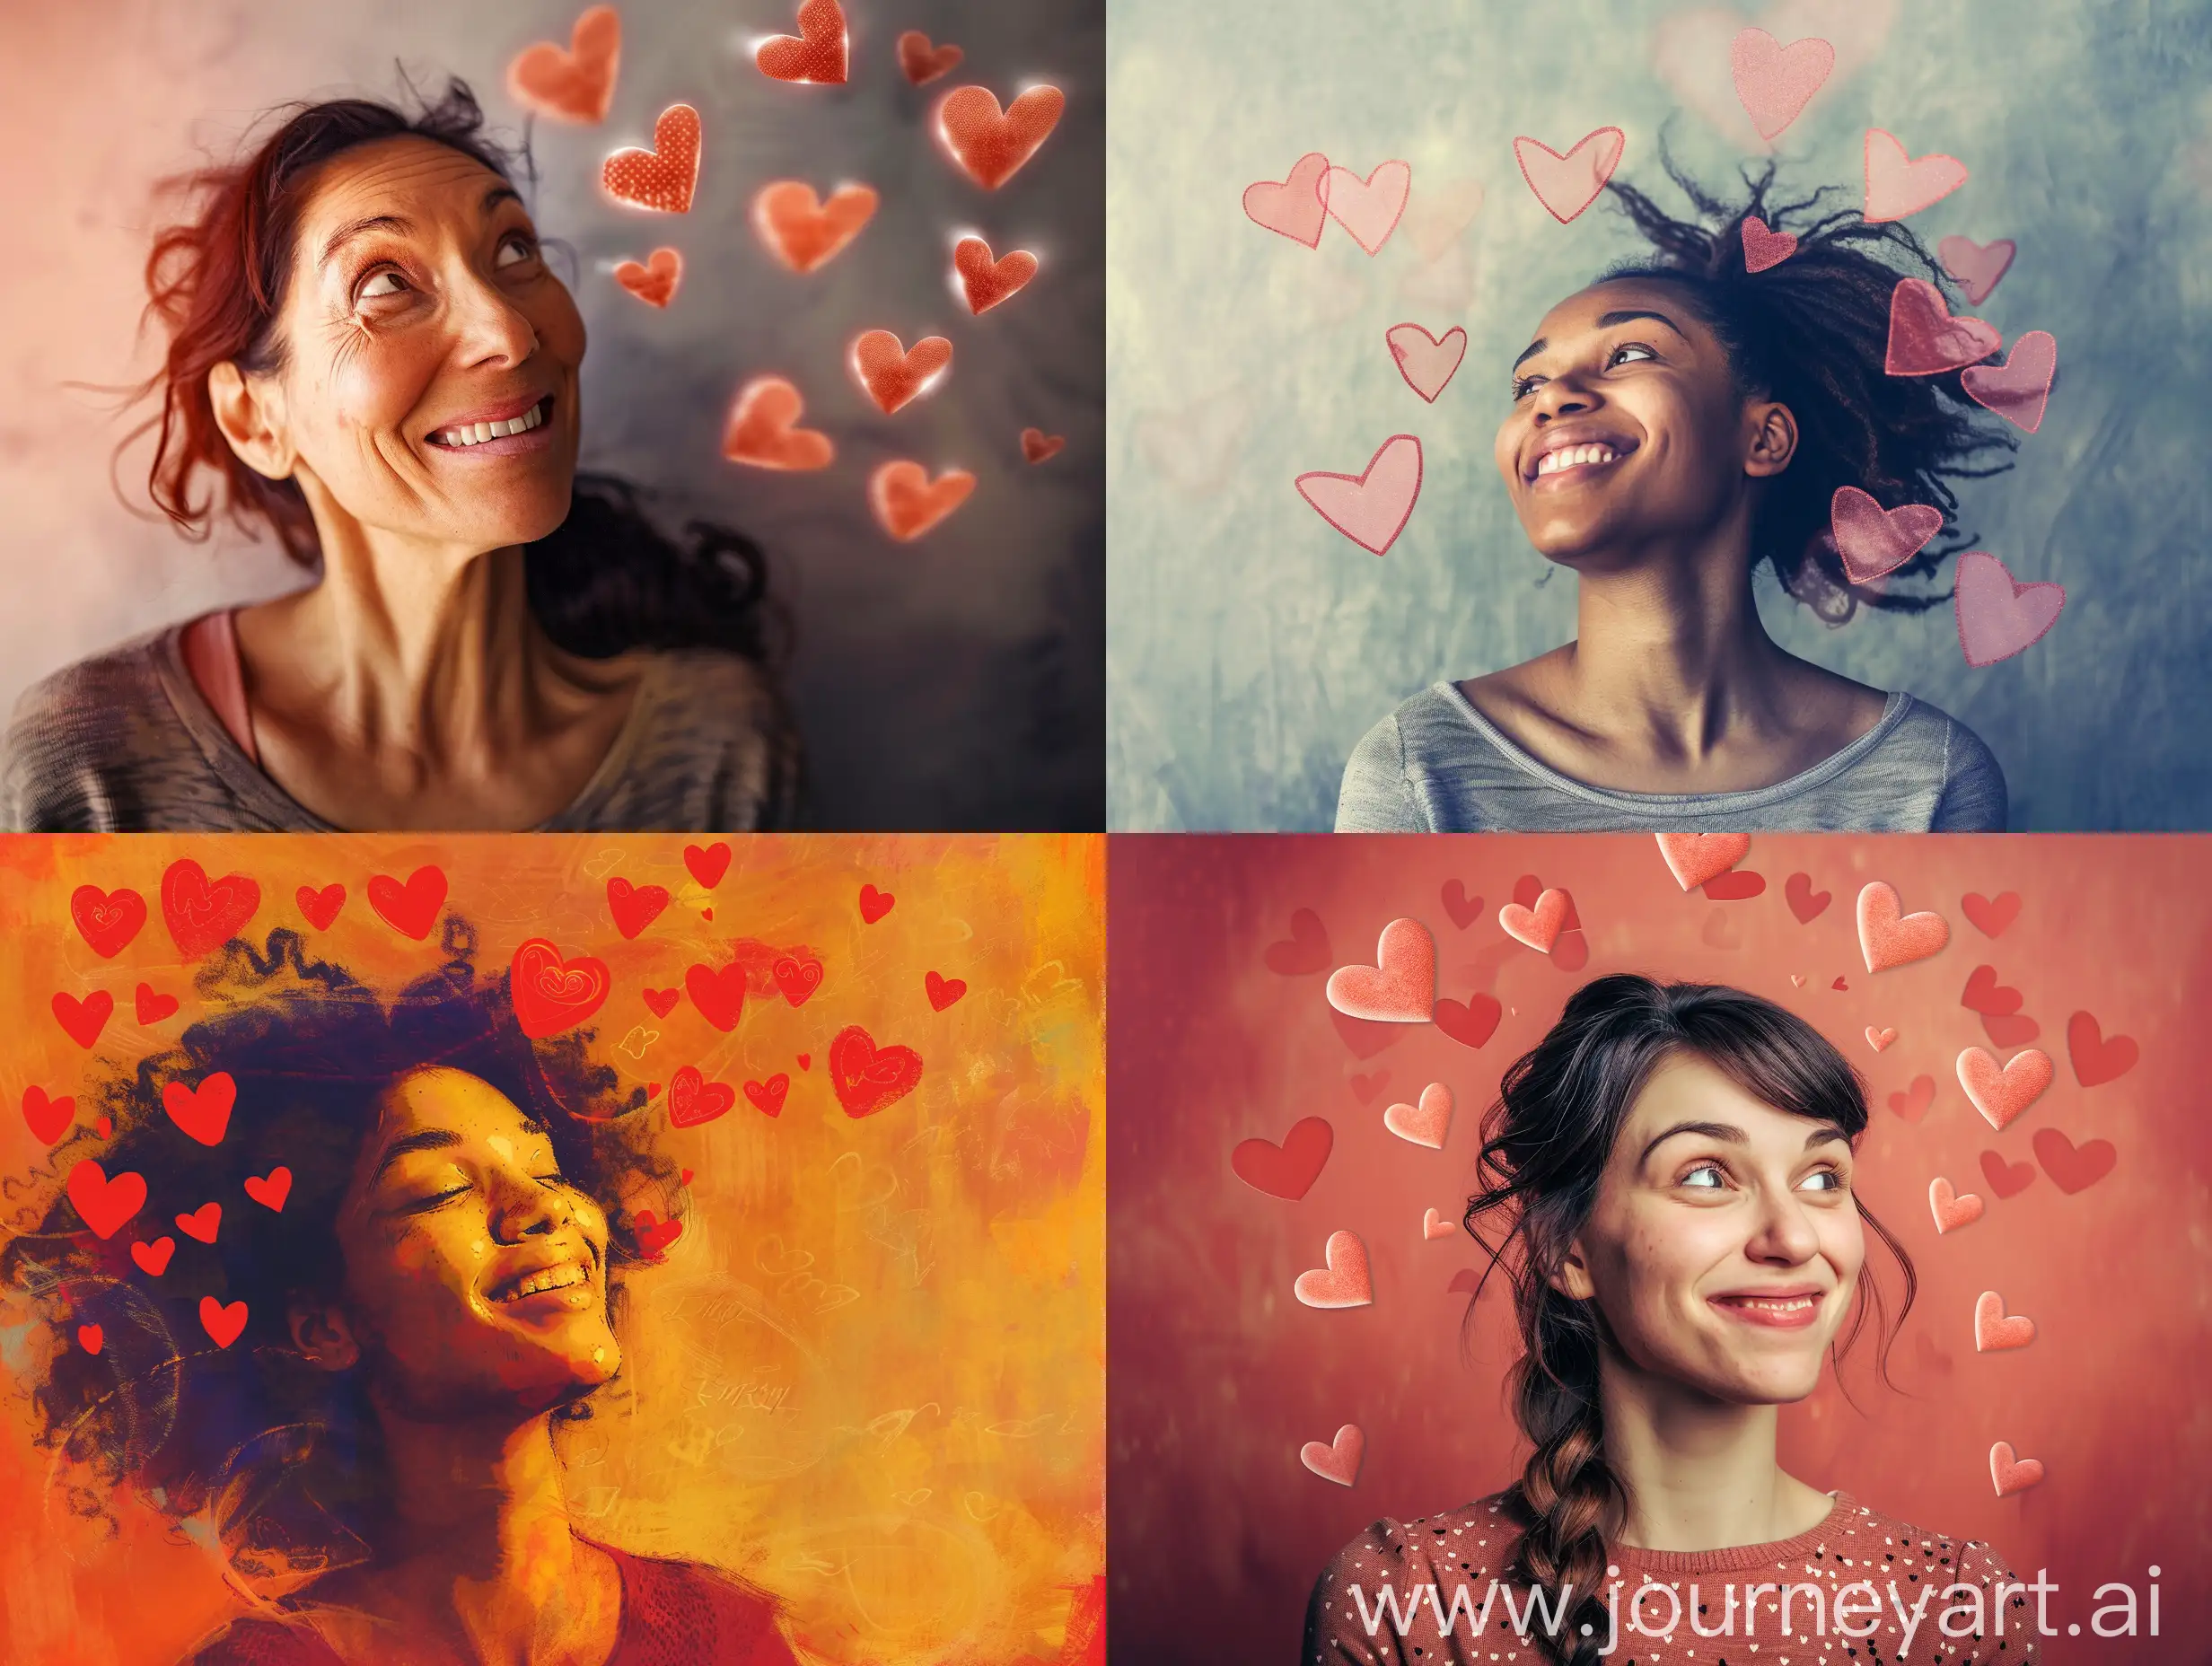 Joyful-Woman-with-Swirling-Hearts-on-Valentines-Day